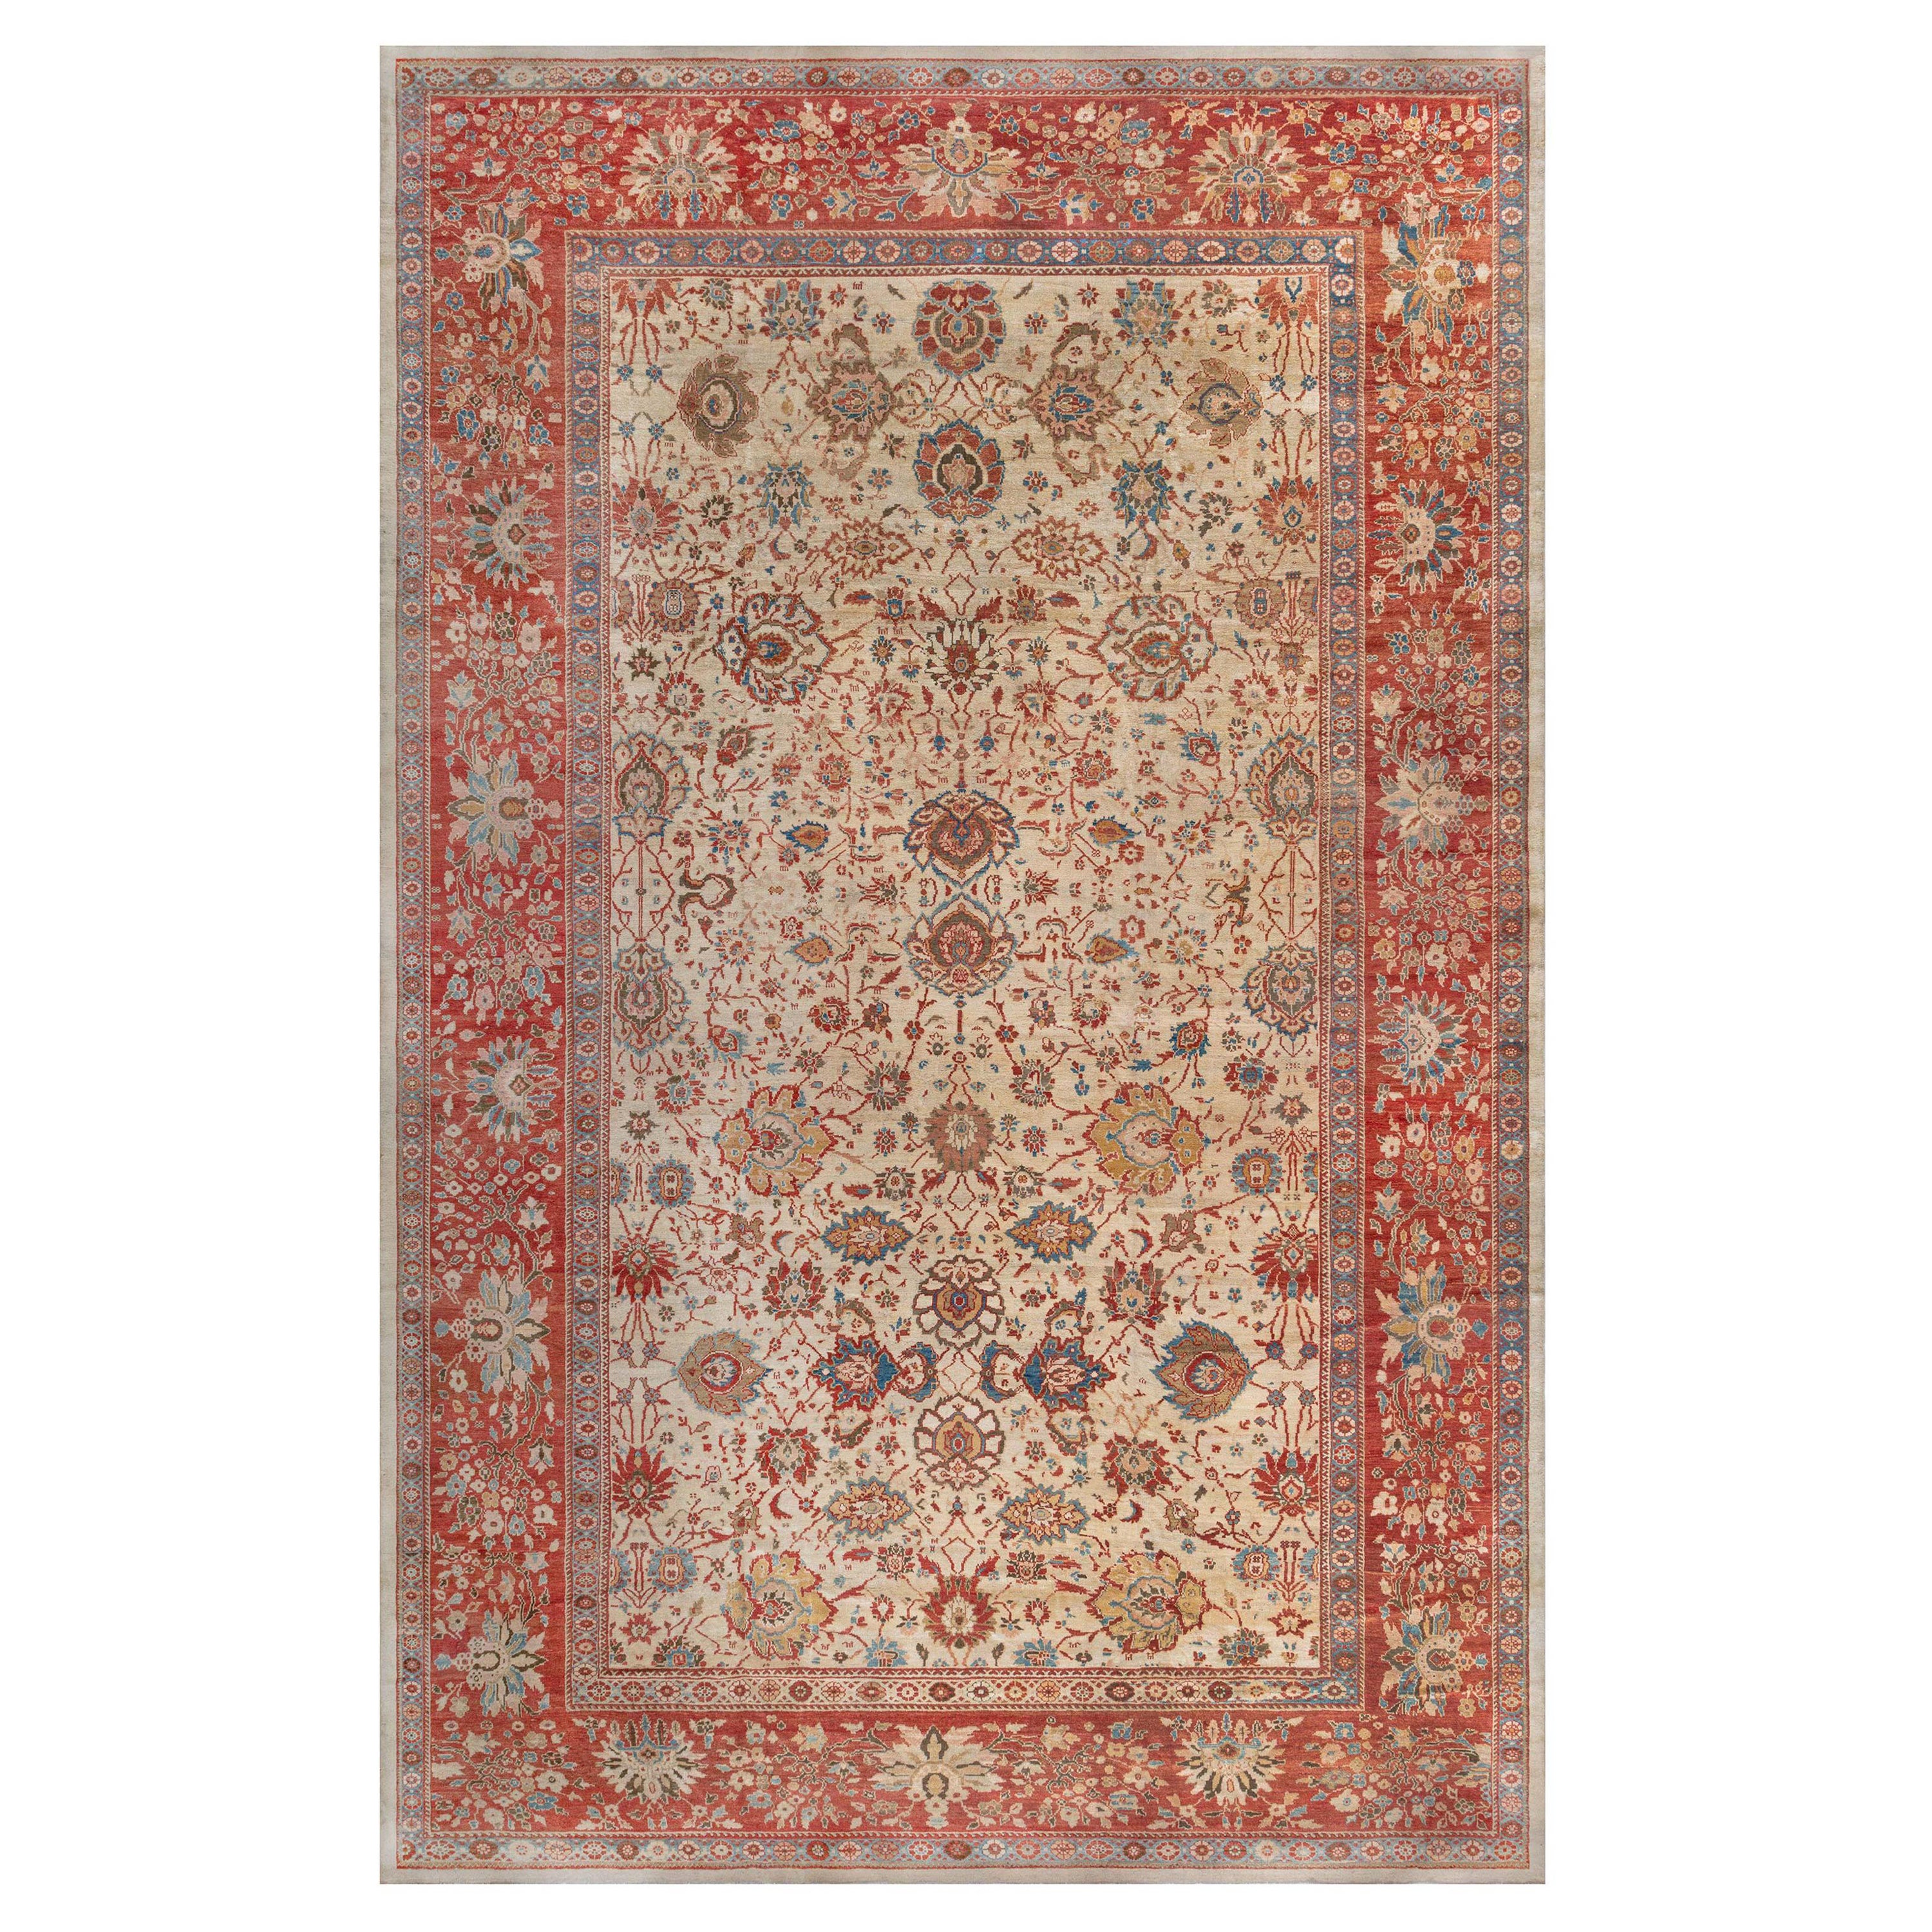  19th Century Persian Sultanabad Red Blue Beige Rug Size Adjusted For Sale